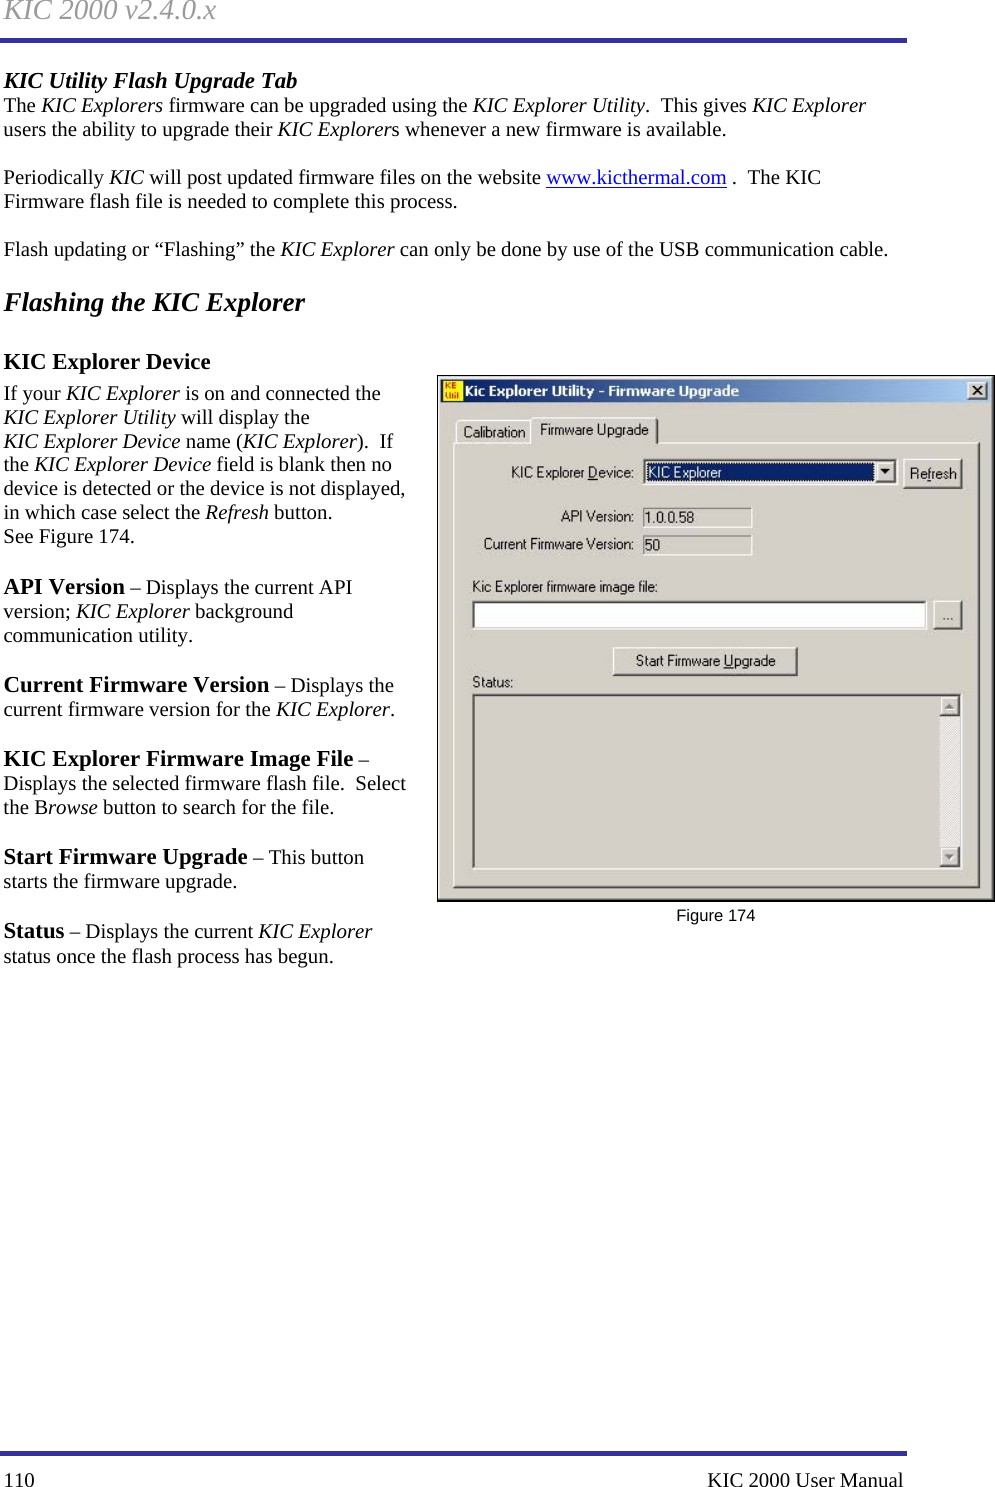 KIC 2000 v2.4.0.x 110    KIC 2000 User Manual KIC Utility Flash Upgrade Tab The KIC Explorers firmware can be upgraded using the KIC Explorer Utility.  This gives KIC Explorer users the ability to upgrade their KIC Explorers whenever a new firmware is available.    Periodically KIC will post updated firmware files on the website www.kicthermal.com .  The KIC Firmware flash file is needed to complete this process.    Flash updating or “Flashing” the KIC Explorer can only be done by use of the USB communication cable.   Flashing the KIC Explorer KIC Explorer Device  If your KIC Explorer is on and connected the KIC Explorer Utility will display the KIC Explorer Device name (KIC Explorer).  If the KIC Explorer Device field is blank then no device is detected or the device is not displayed, in which case select the Refresh button. See Figure 174.    API Version – Displays the current API version; KIC Explorer background communication utility.  Current Firmware Version – Displays the current firmware version for the KIC Explorer.  KIC Explorer Firmware Image File – Displays the selected firmware flash file.  Select the Browse button to search for the file.    Start Firmware Upgrade – This button starts the firmware upgrade.    Status – Displays the current KIC Explorer status once the flash process has begun.       Figure 174 